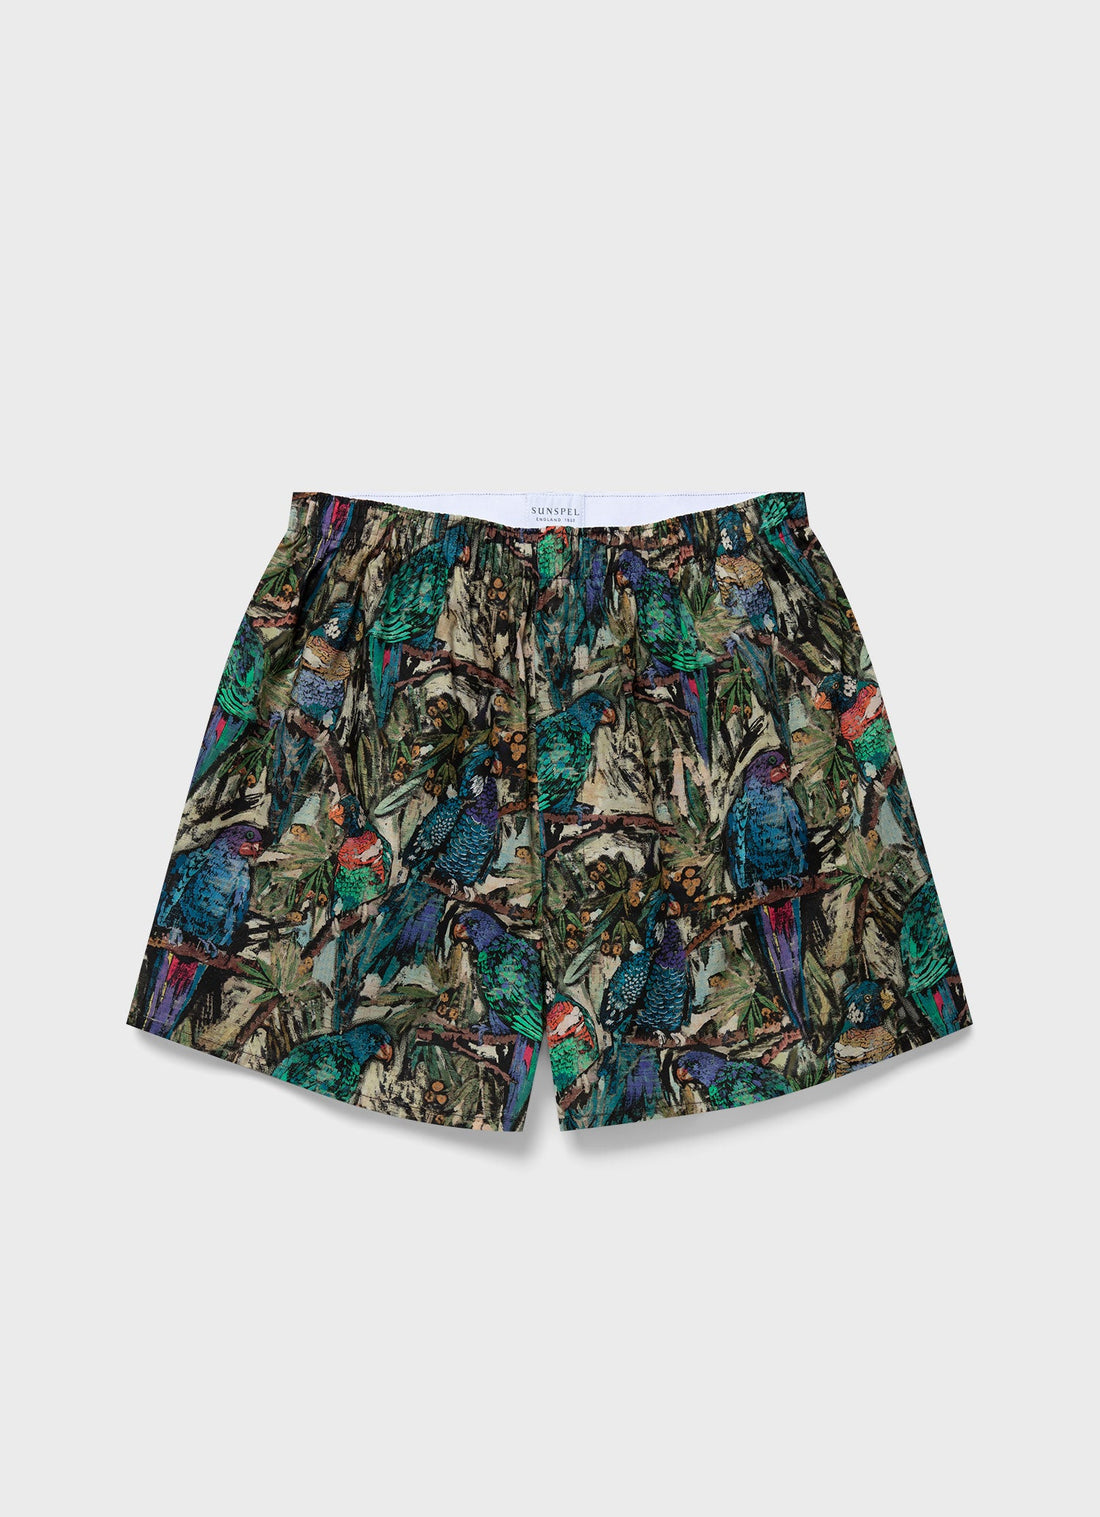 Men's Classic Boxer Shorts in Liberty Fabric in Jungle